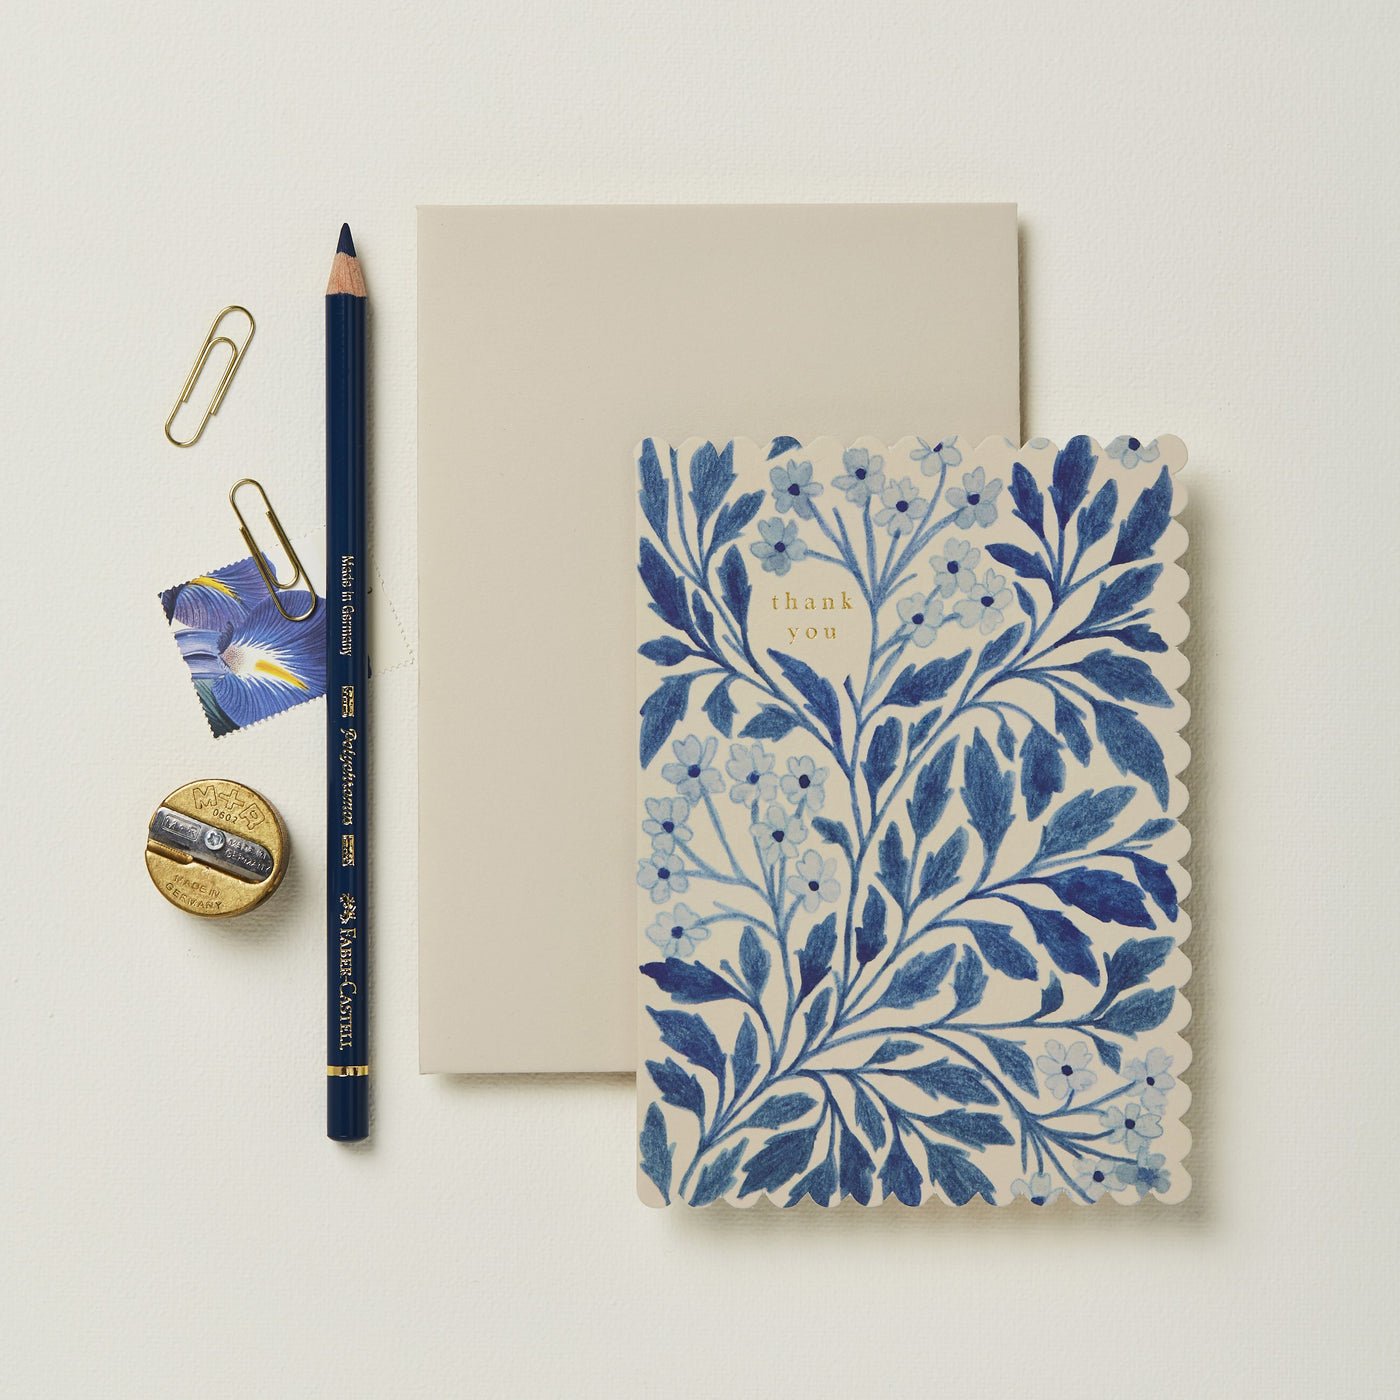 Blue Floral 'Thank You' Greetings Card